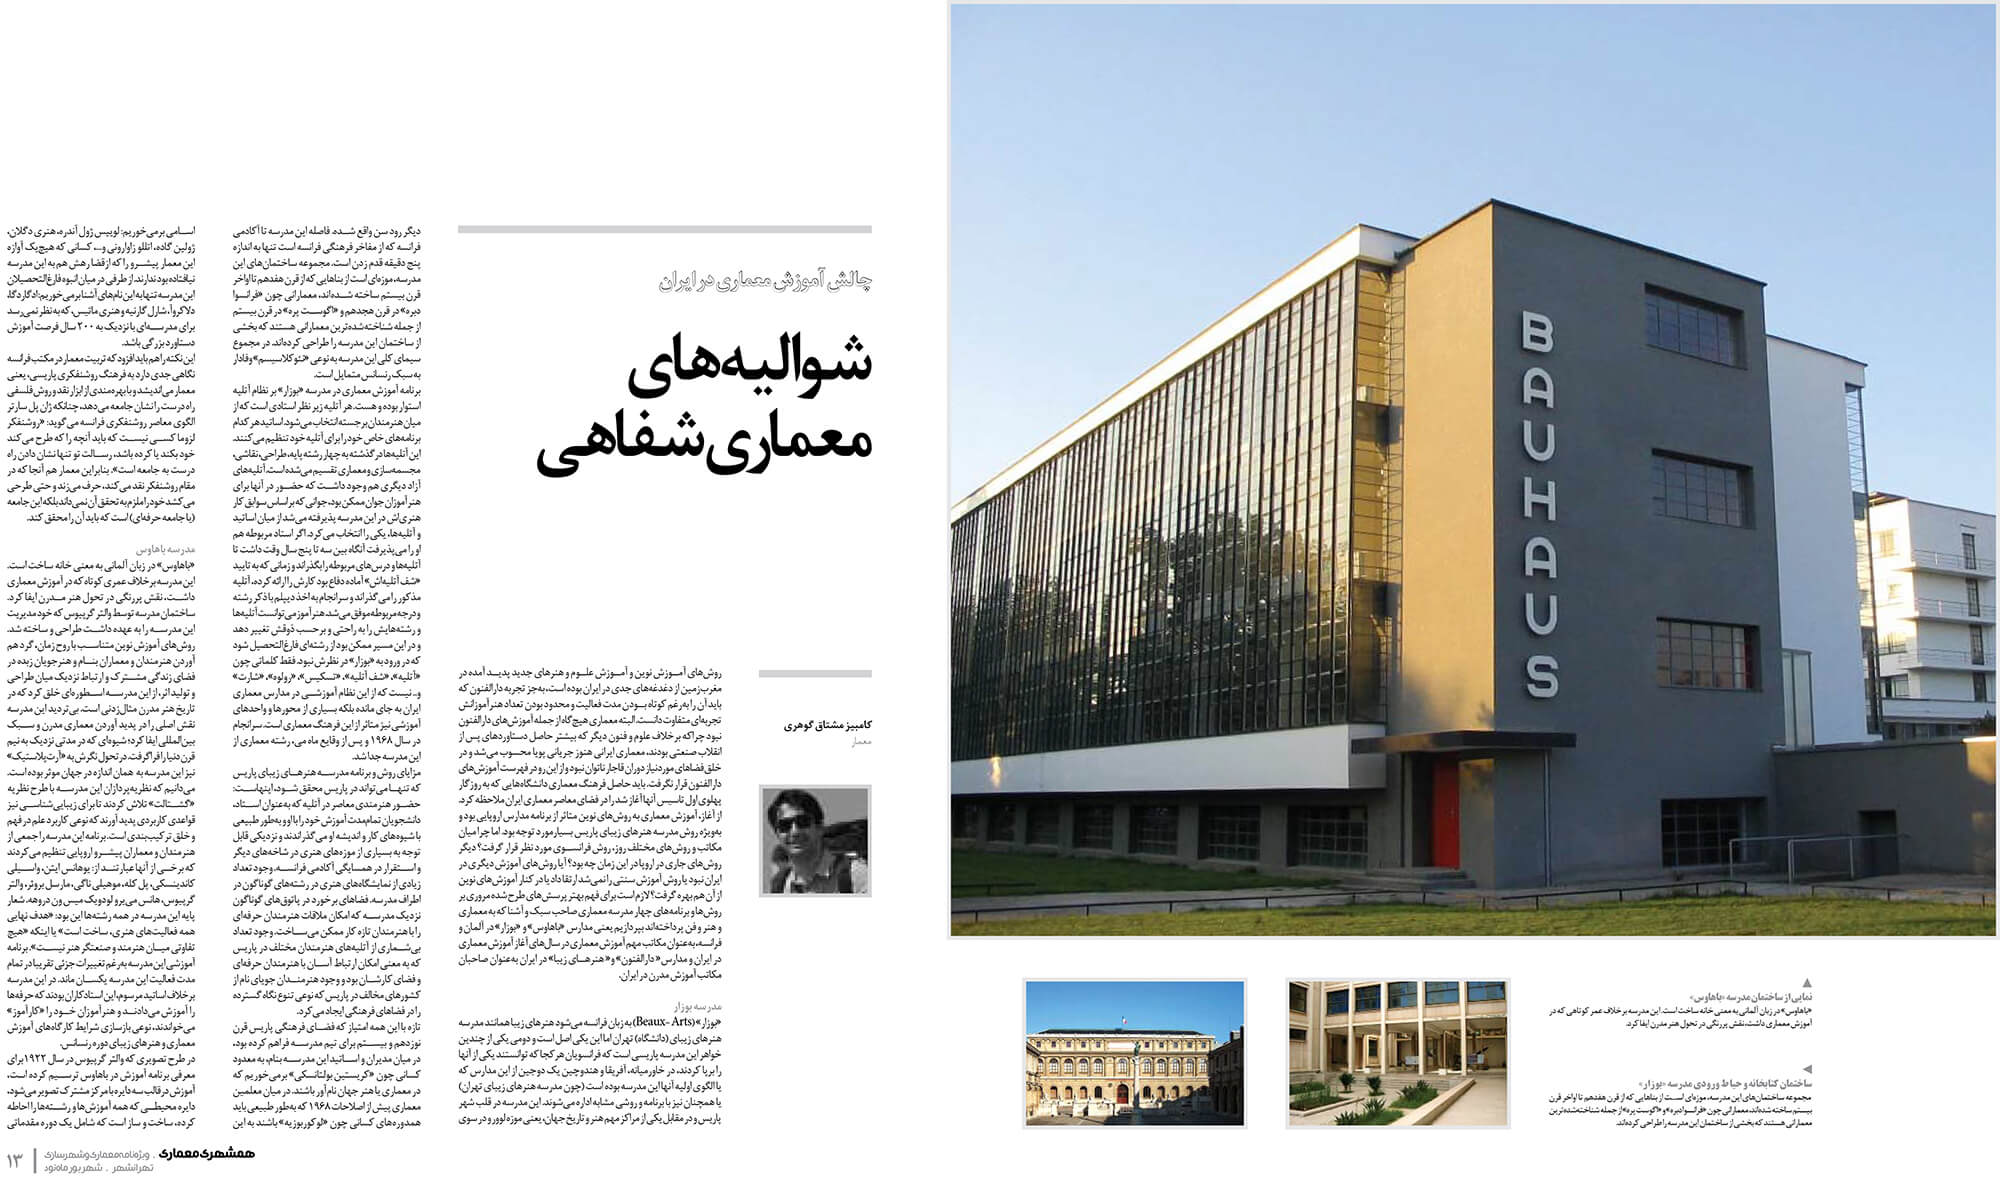 picture no. 2 of publication: The Knights of Oral Architecture, author: Kambiz Moshtaq